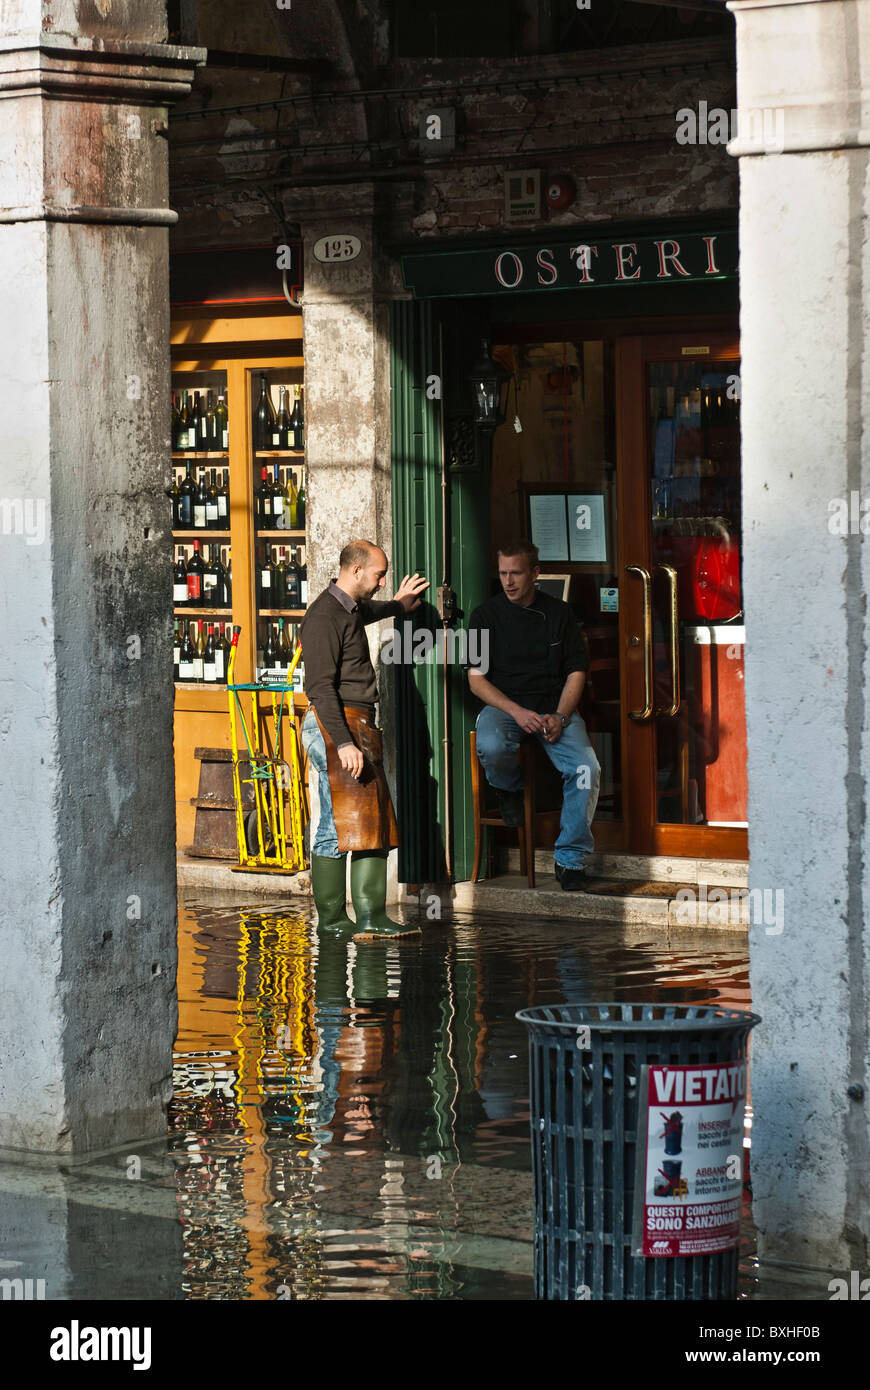 People having a break on a street flooded by 'acqua alta', Venice, Italy, Europe Stock Photo